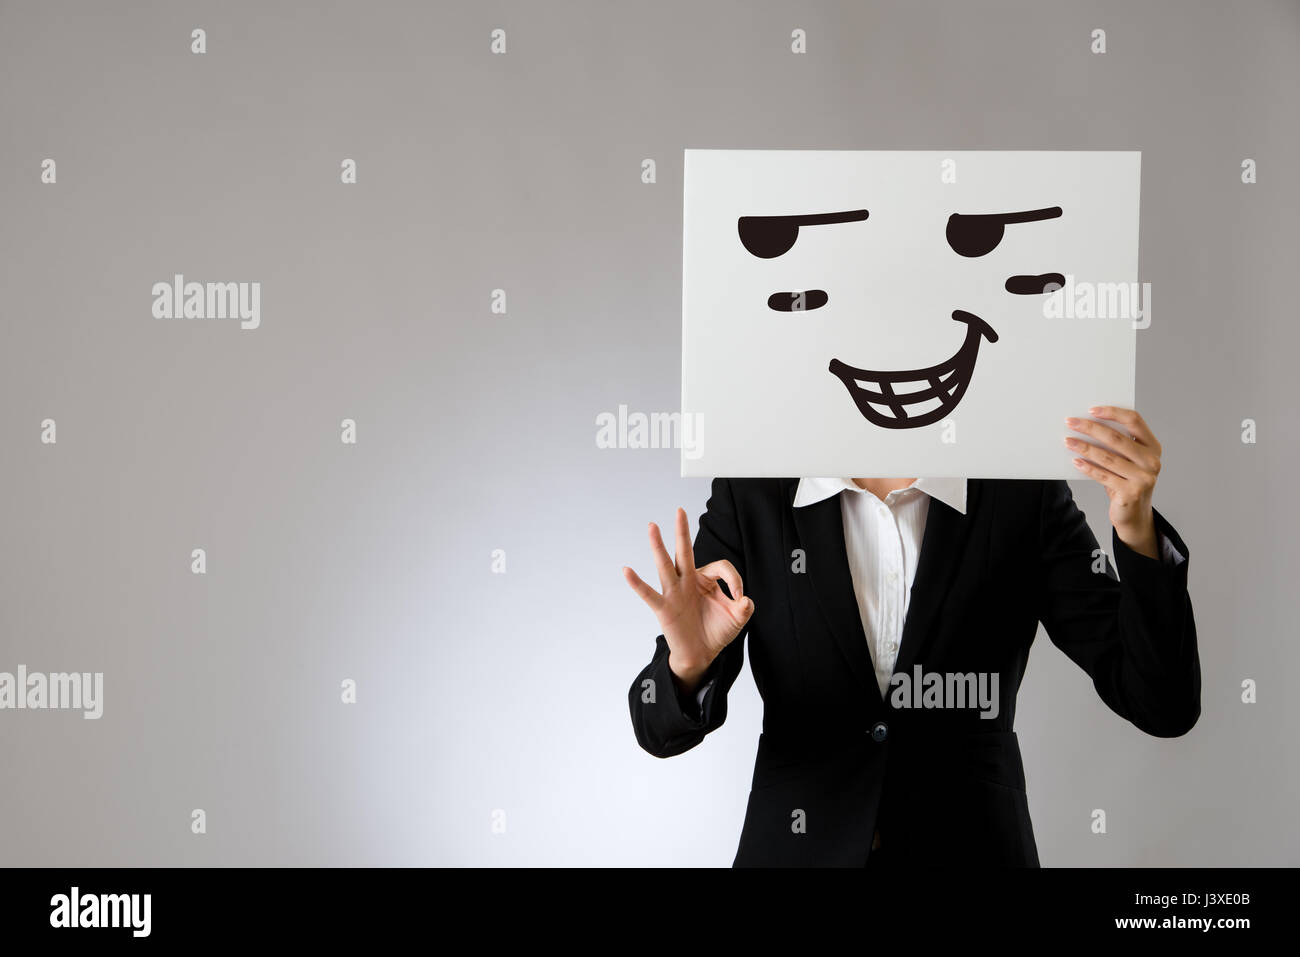 proud face expression drawing on blank white billboard with okay hand gesture. isolated on gray background. business office company concept. Stock Photo